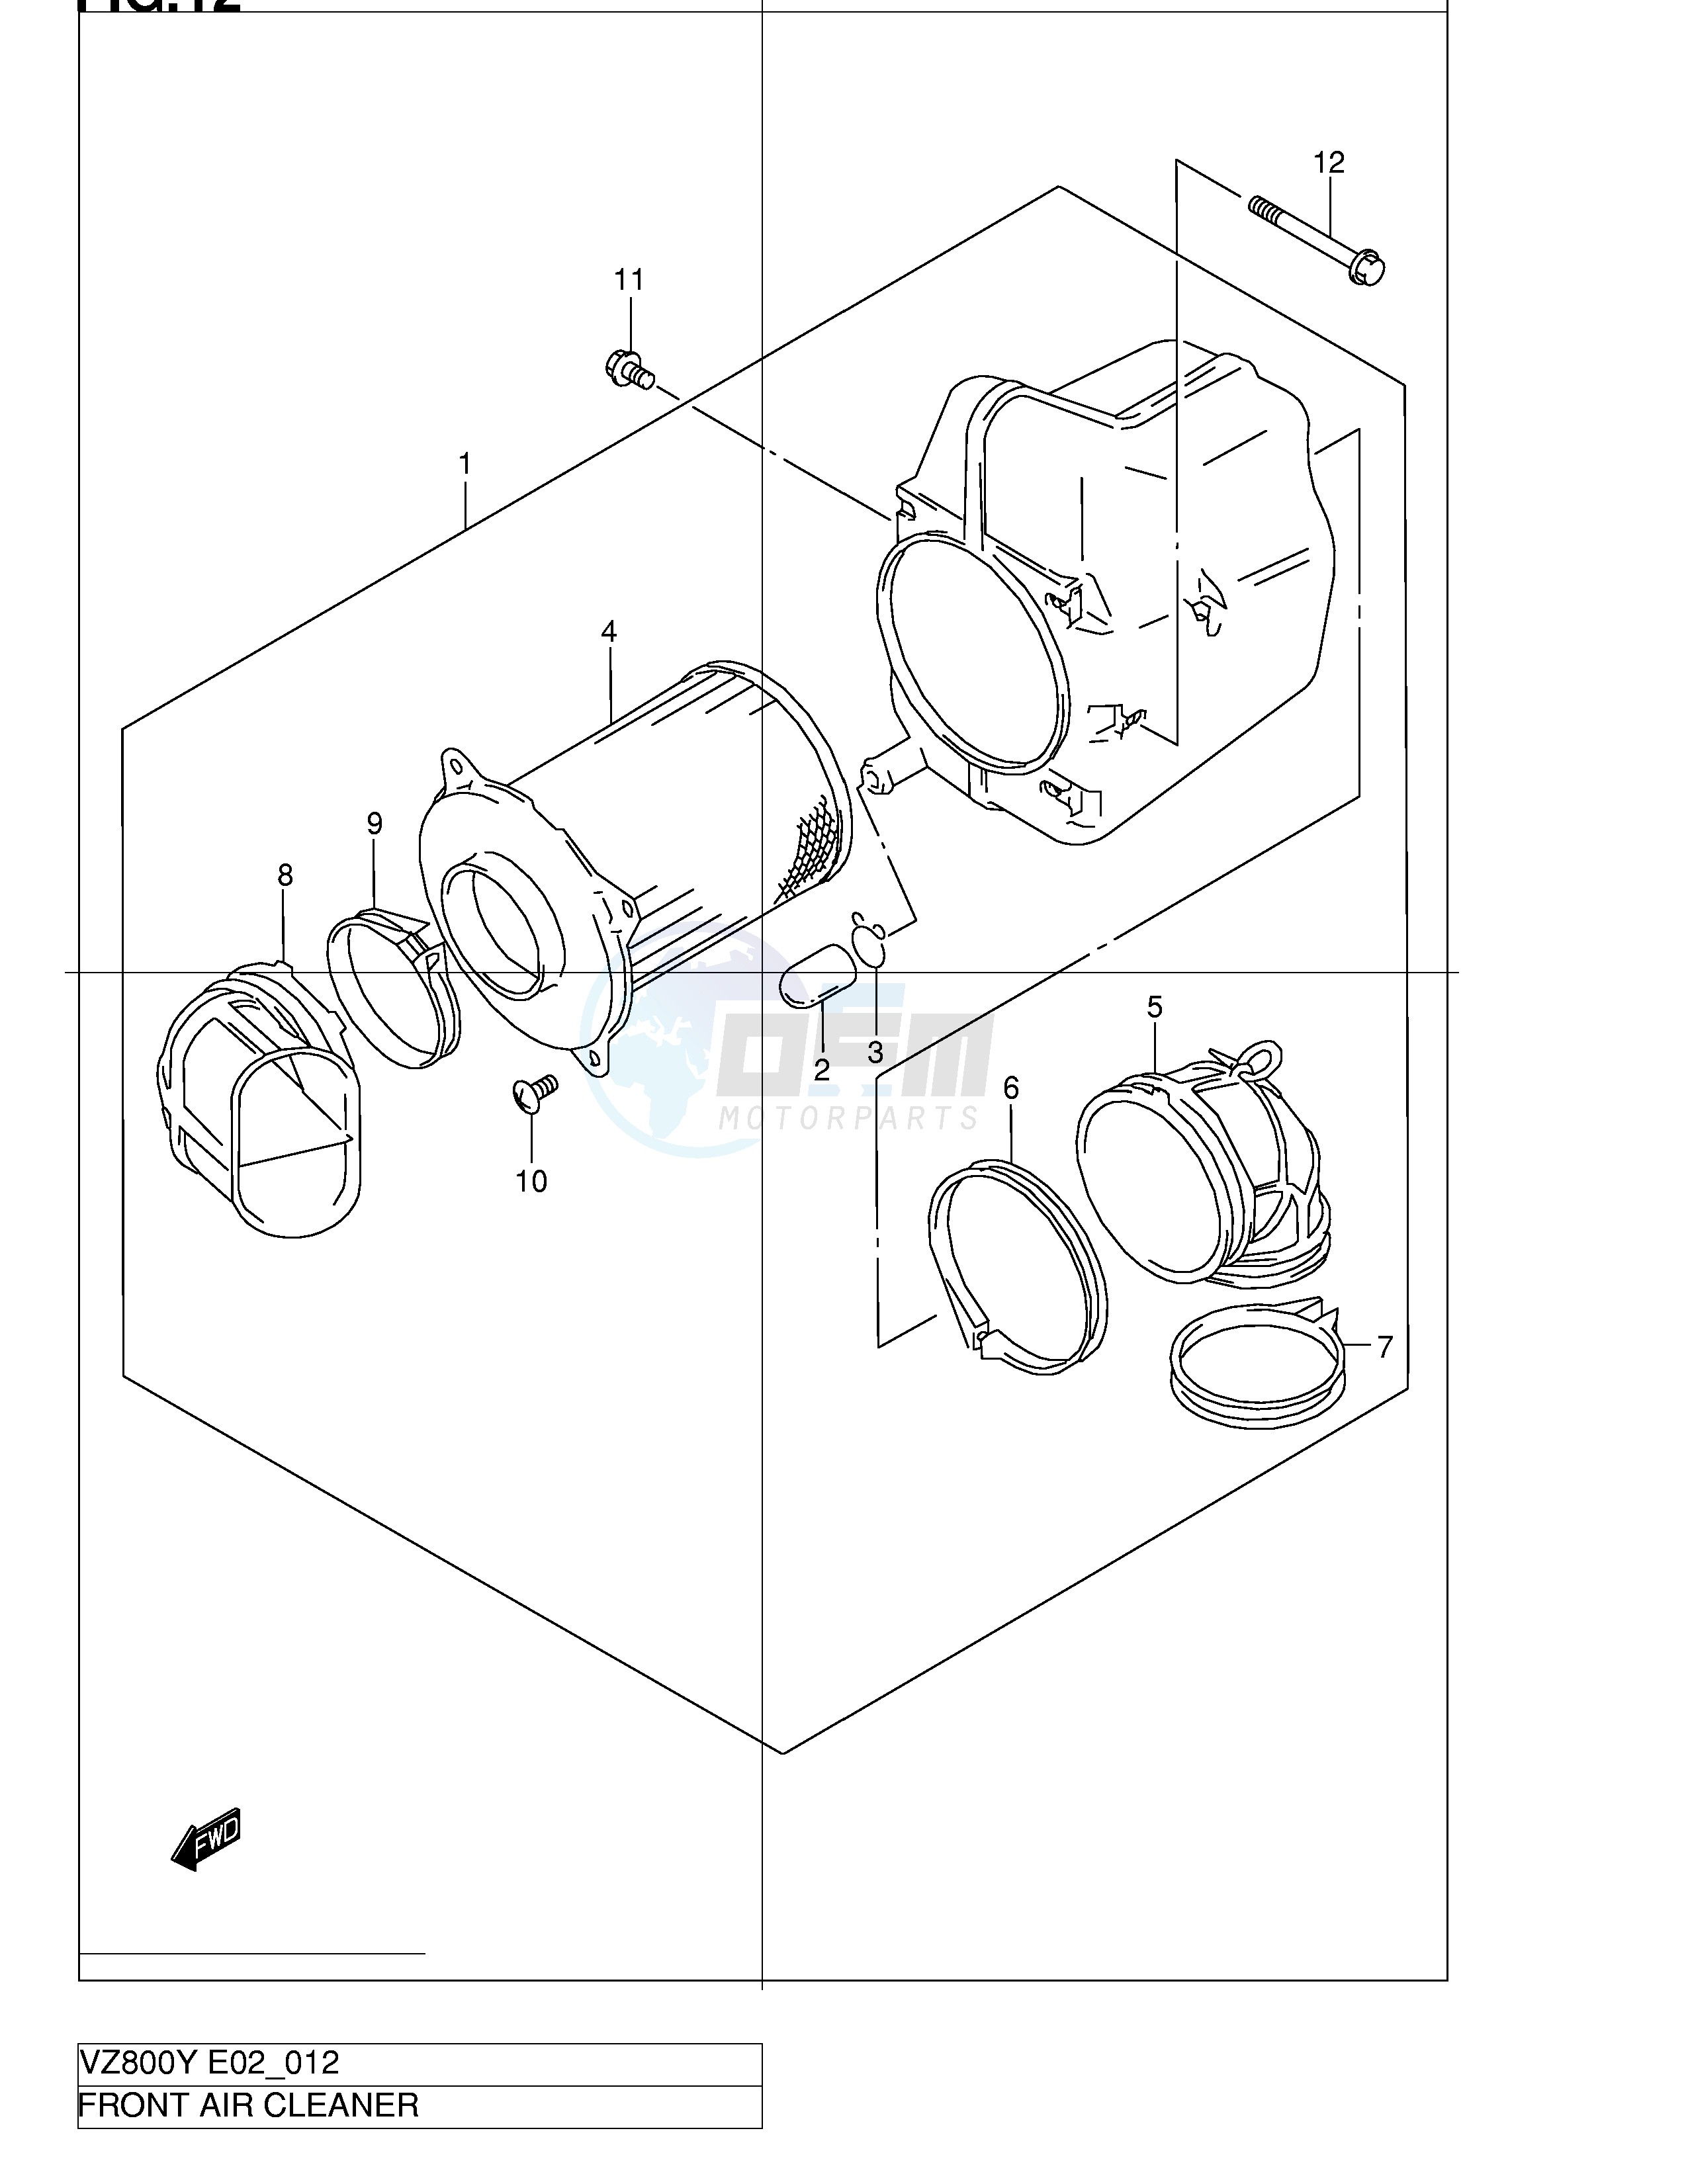 FRONT AIR CLEANER blueprint